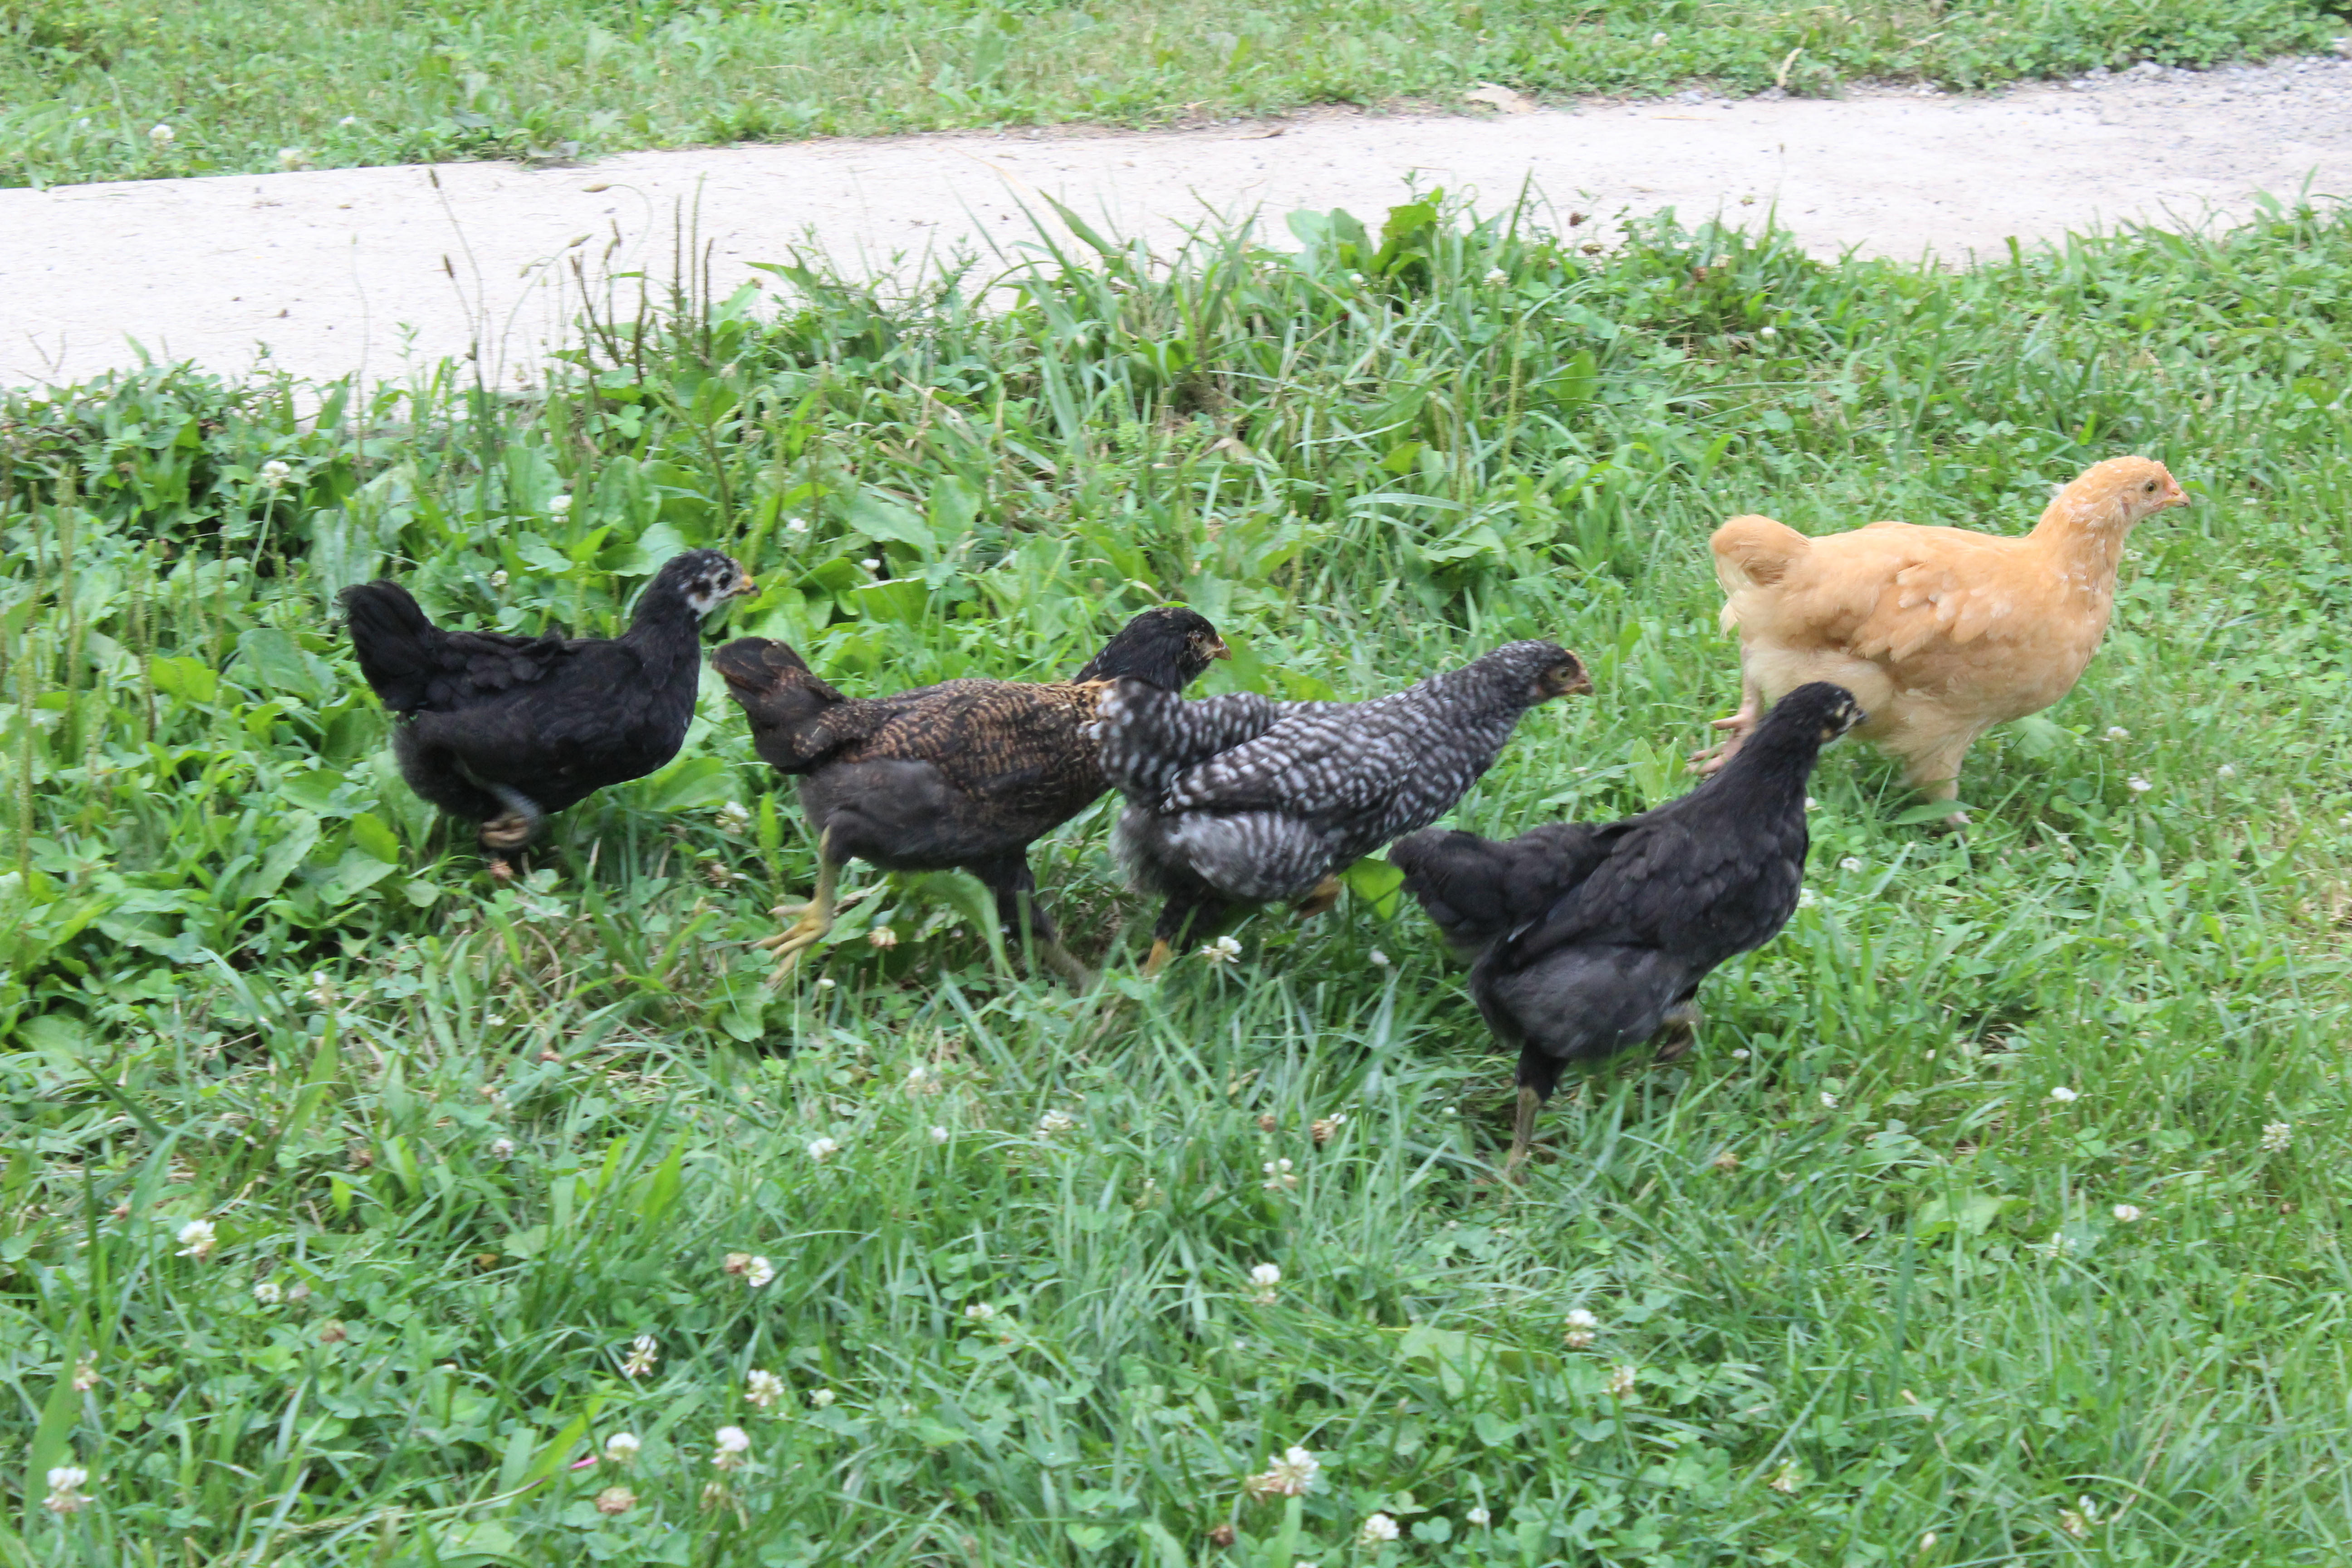 My girls, free ranging in the yard. They are on a run.